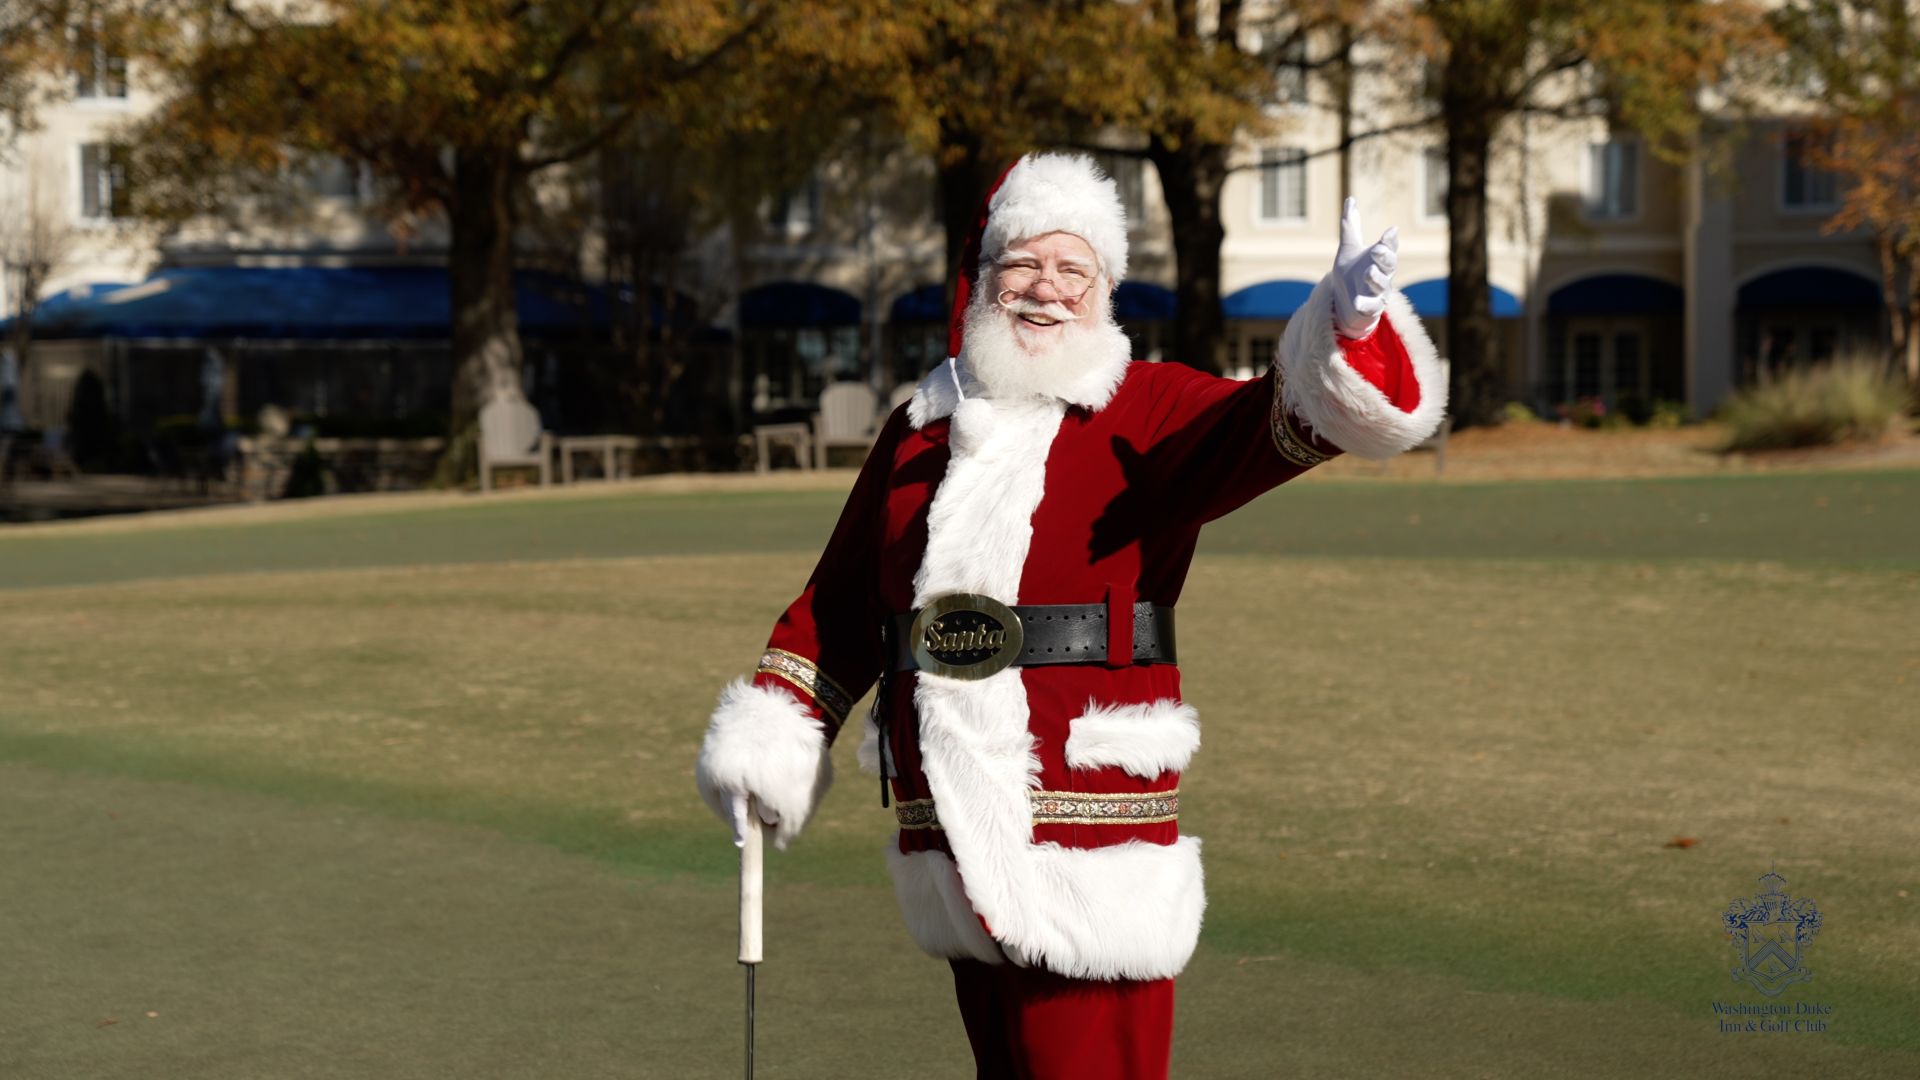 A Person In A Red And White Garment Holding A Golf Club